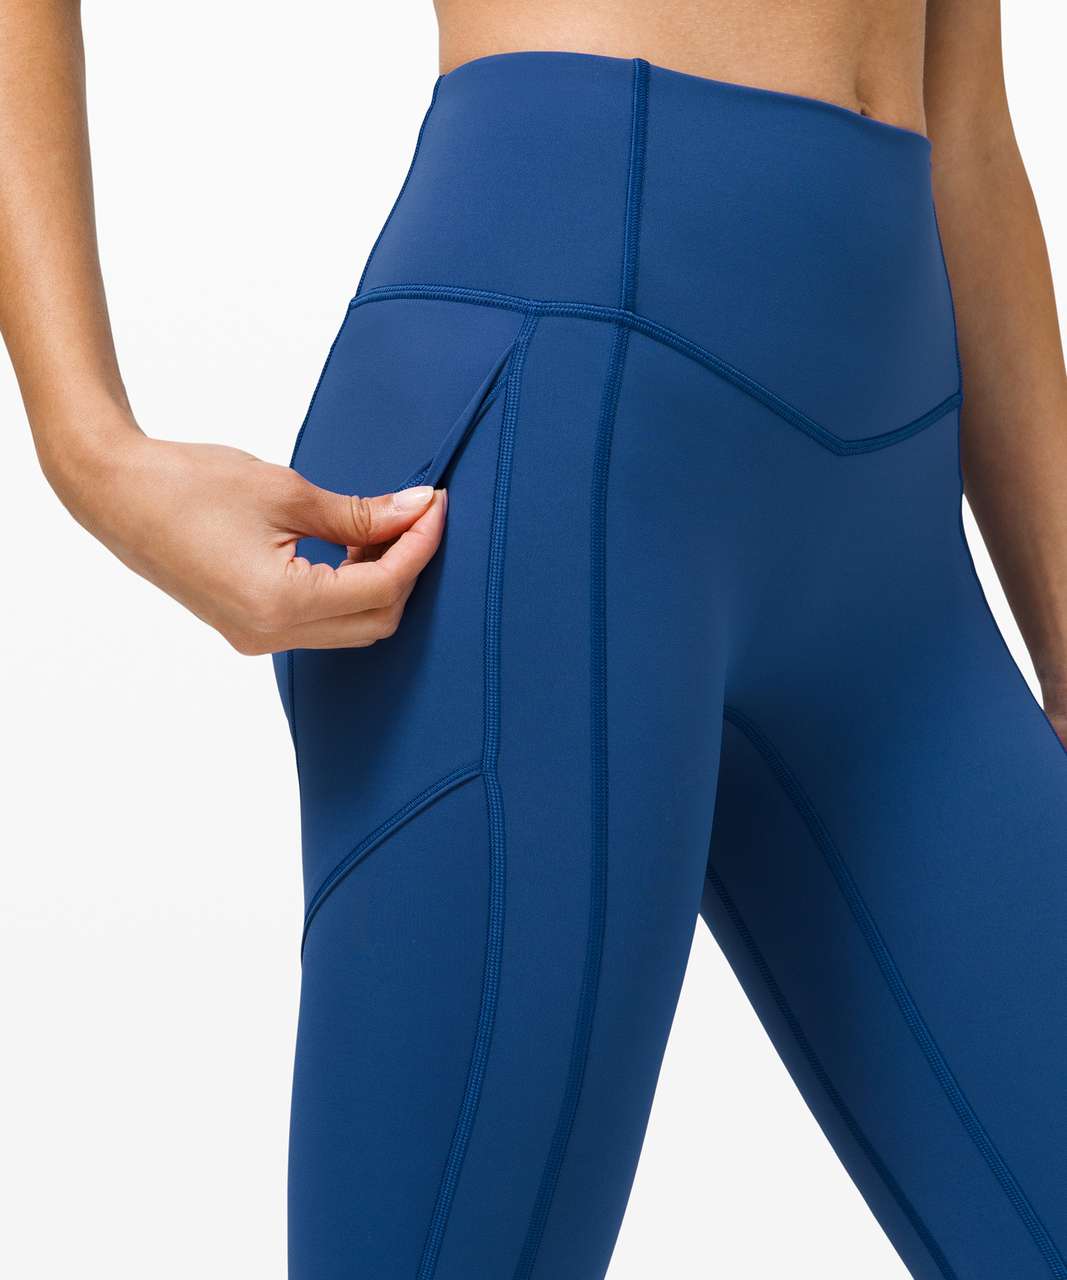 Lululemon All The Right Places Crop II (23) Cerulean Blue